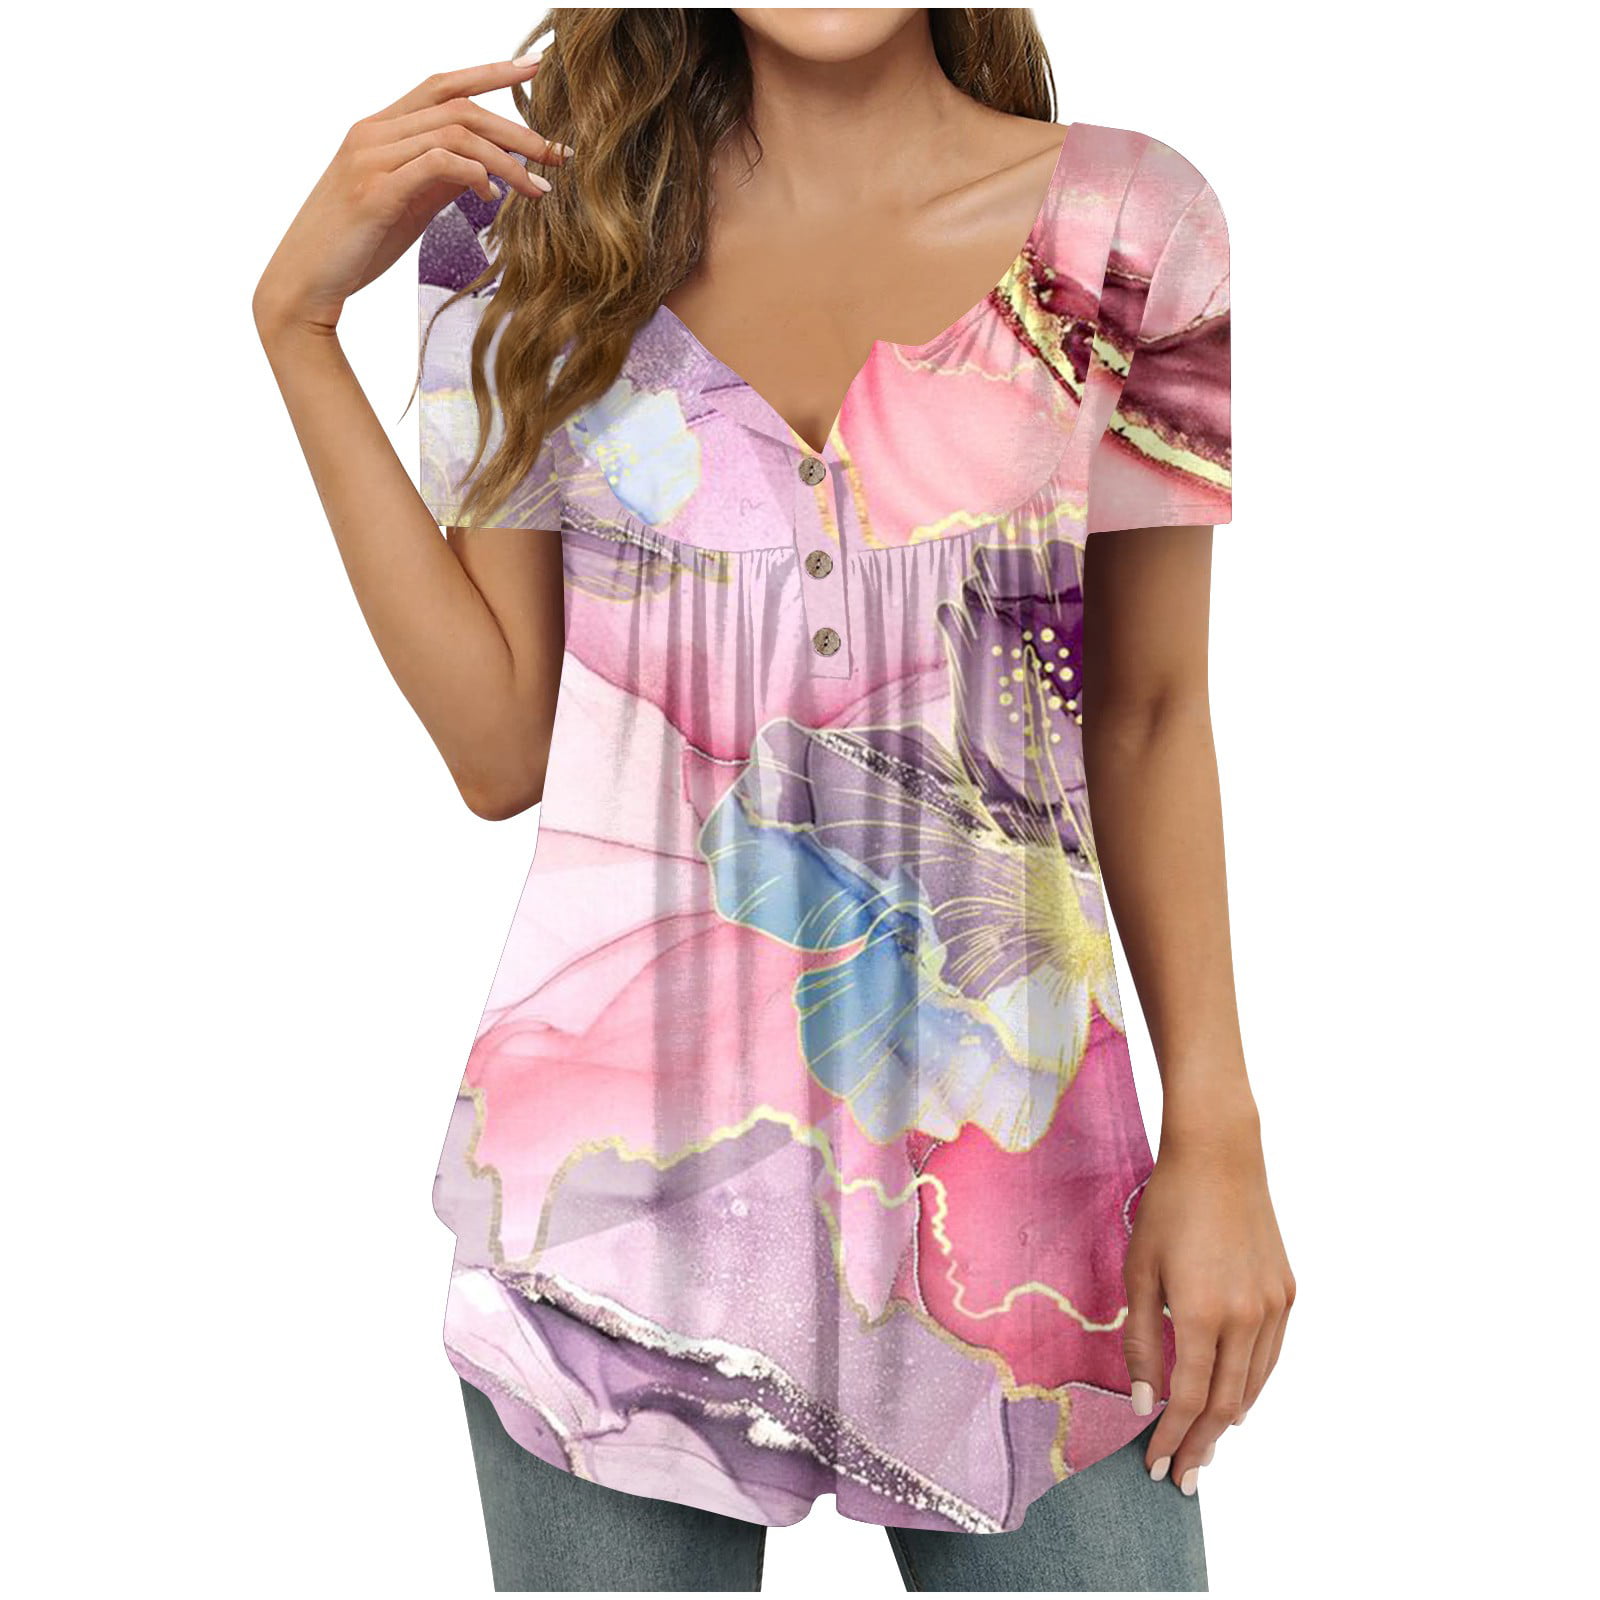 ZXHACSJ Women's Fashion Floral Printing Pleated Short Sleeve 